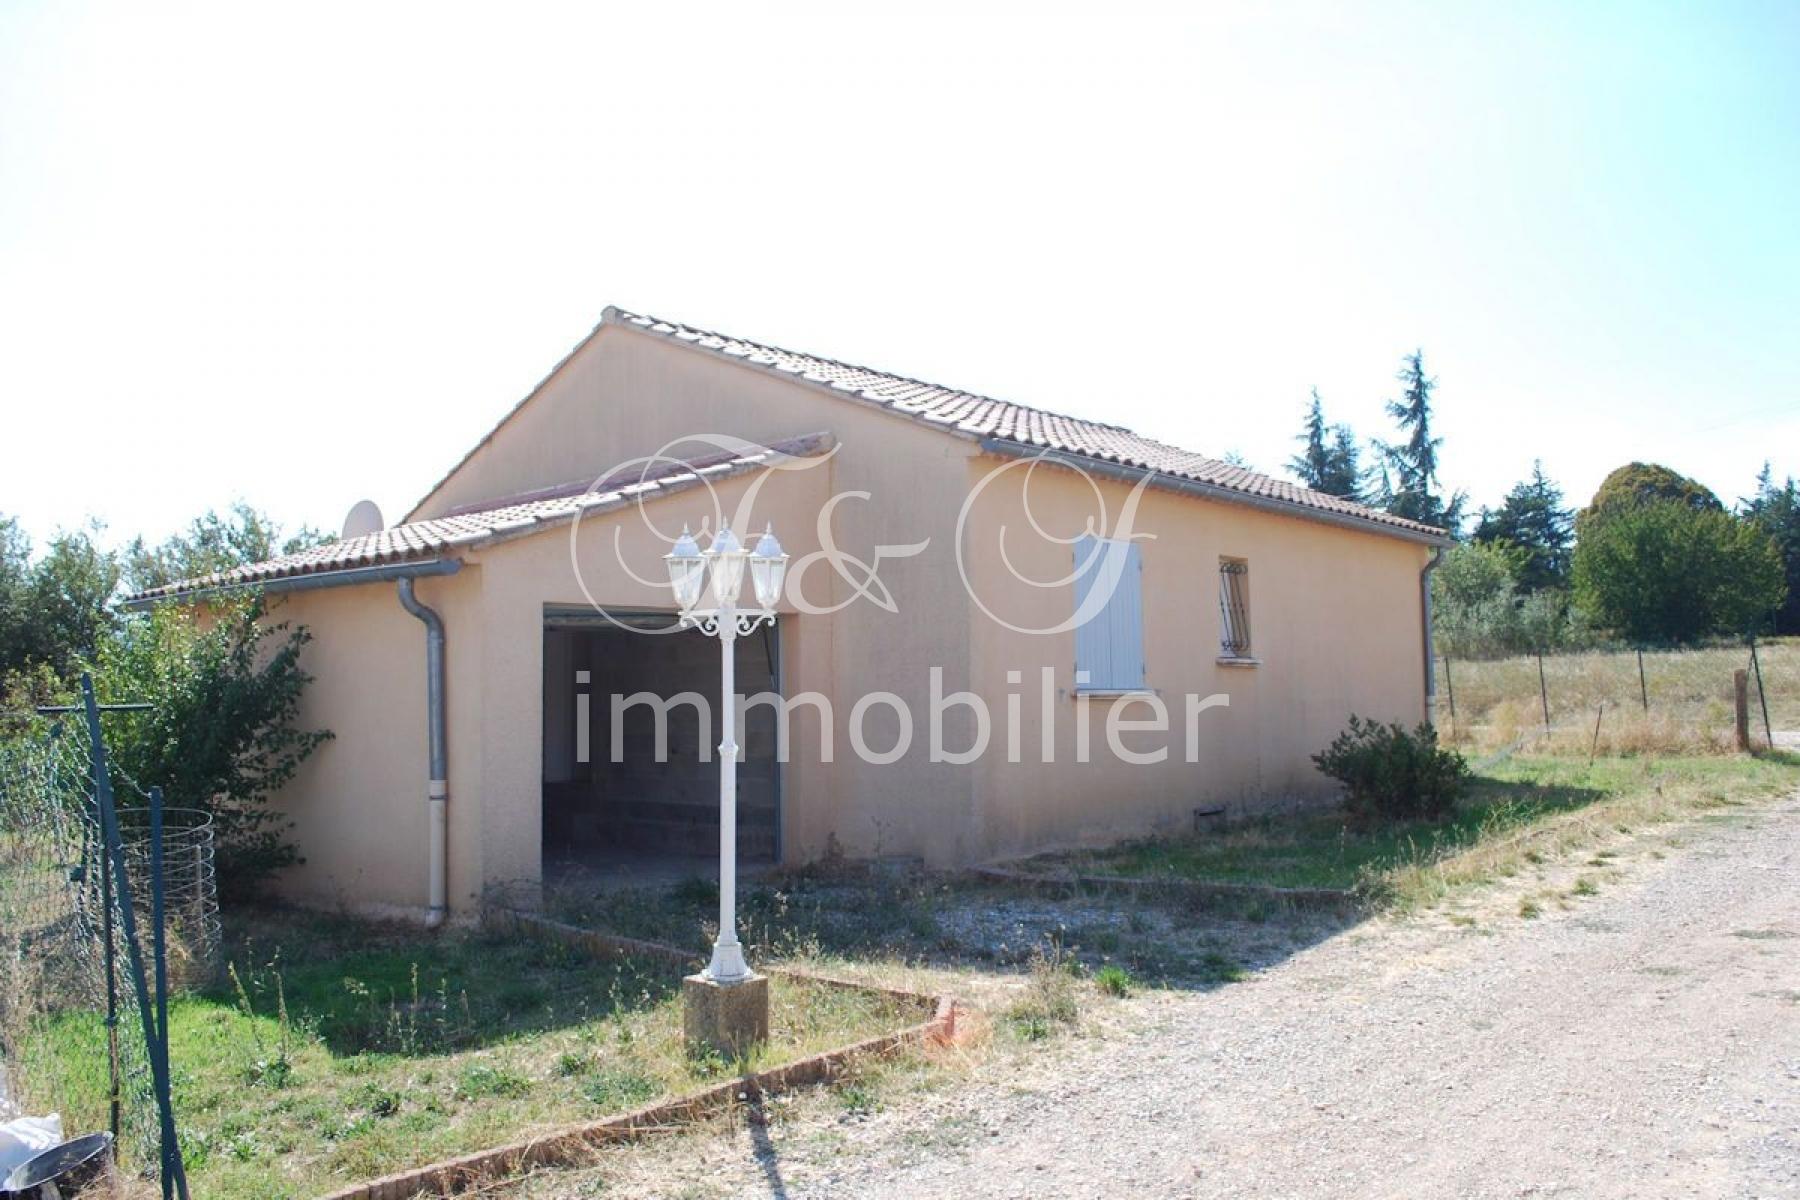 House with land in Simiane-La-Rotonde